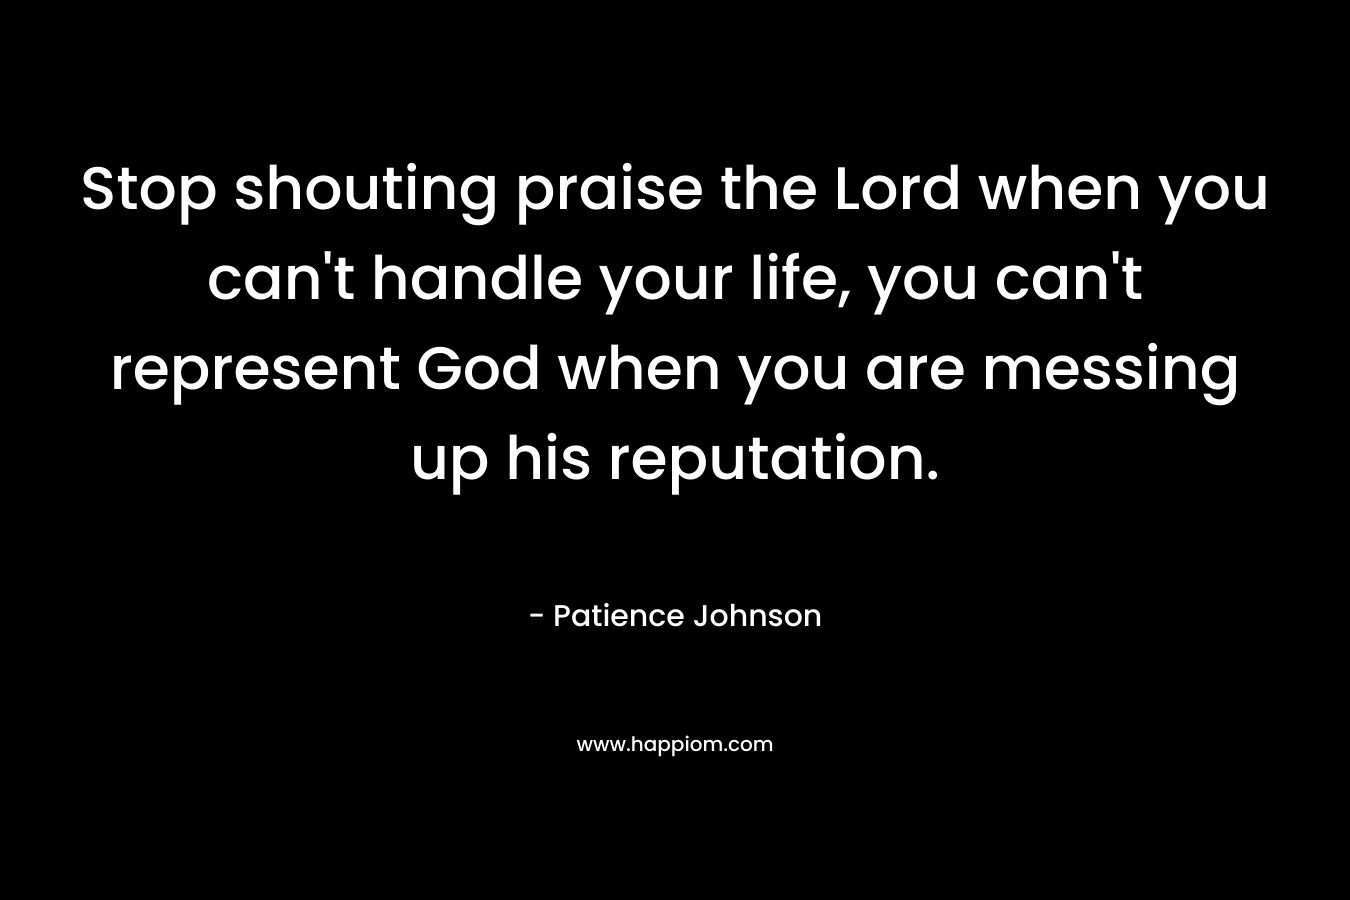 Stop shouting praise the Lord when you can't handle your life, you can't represent God when you are messing up his reputation.